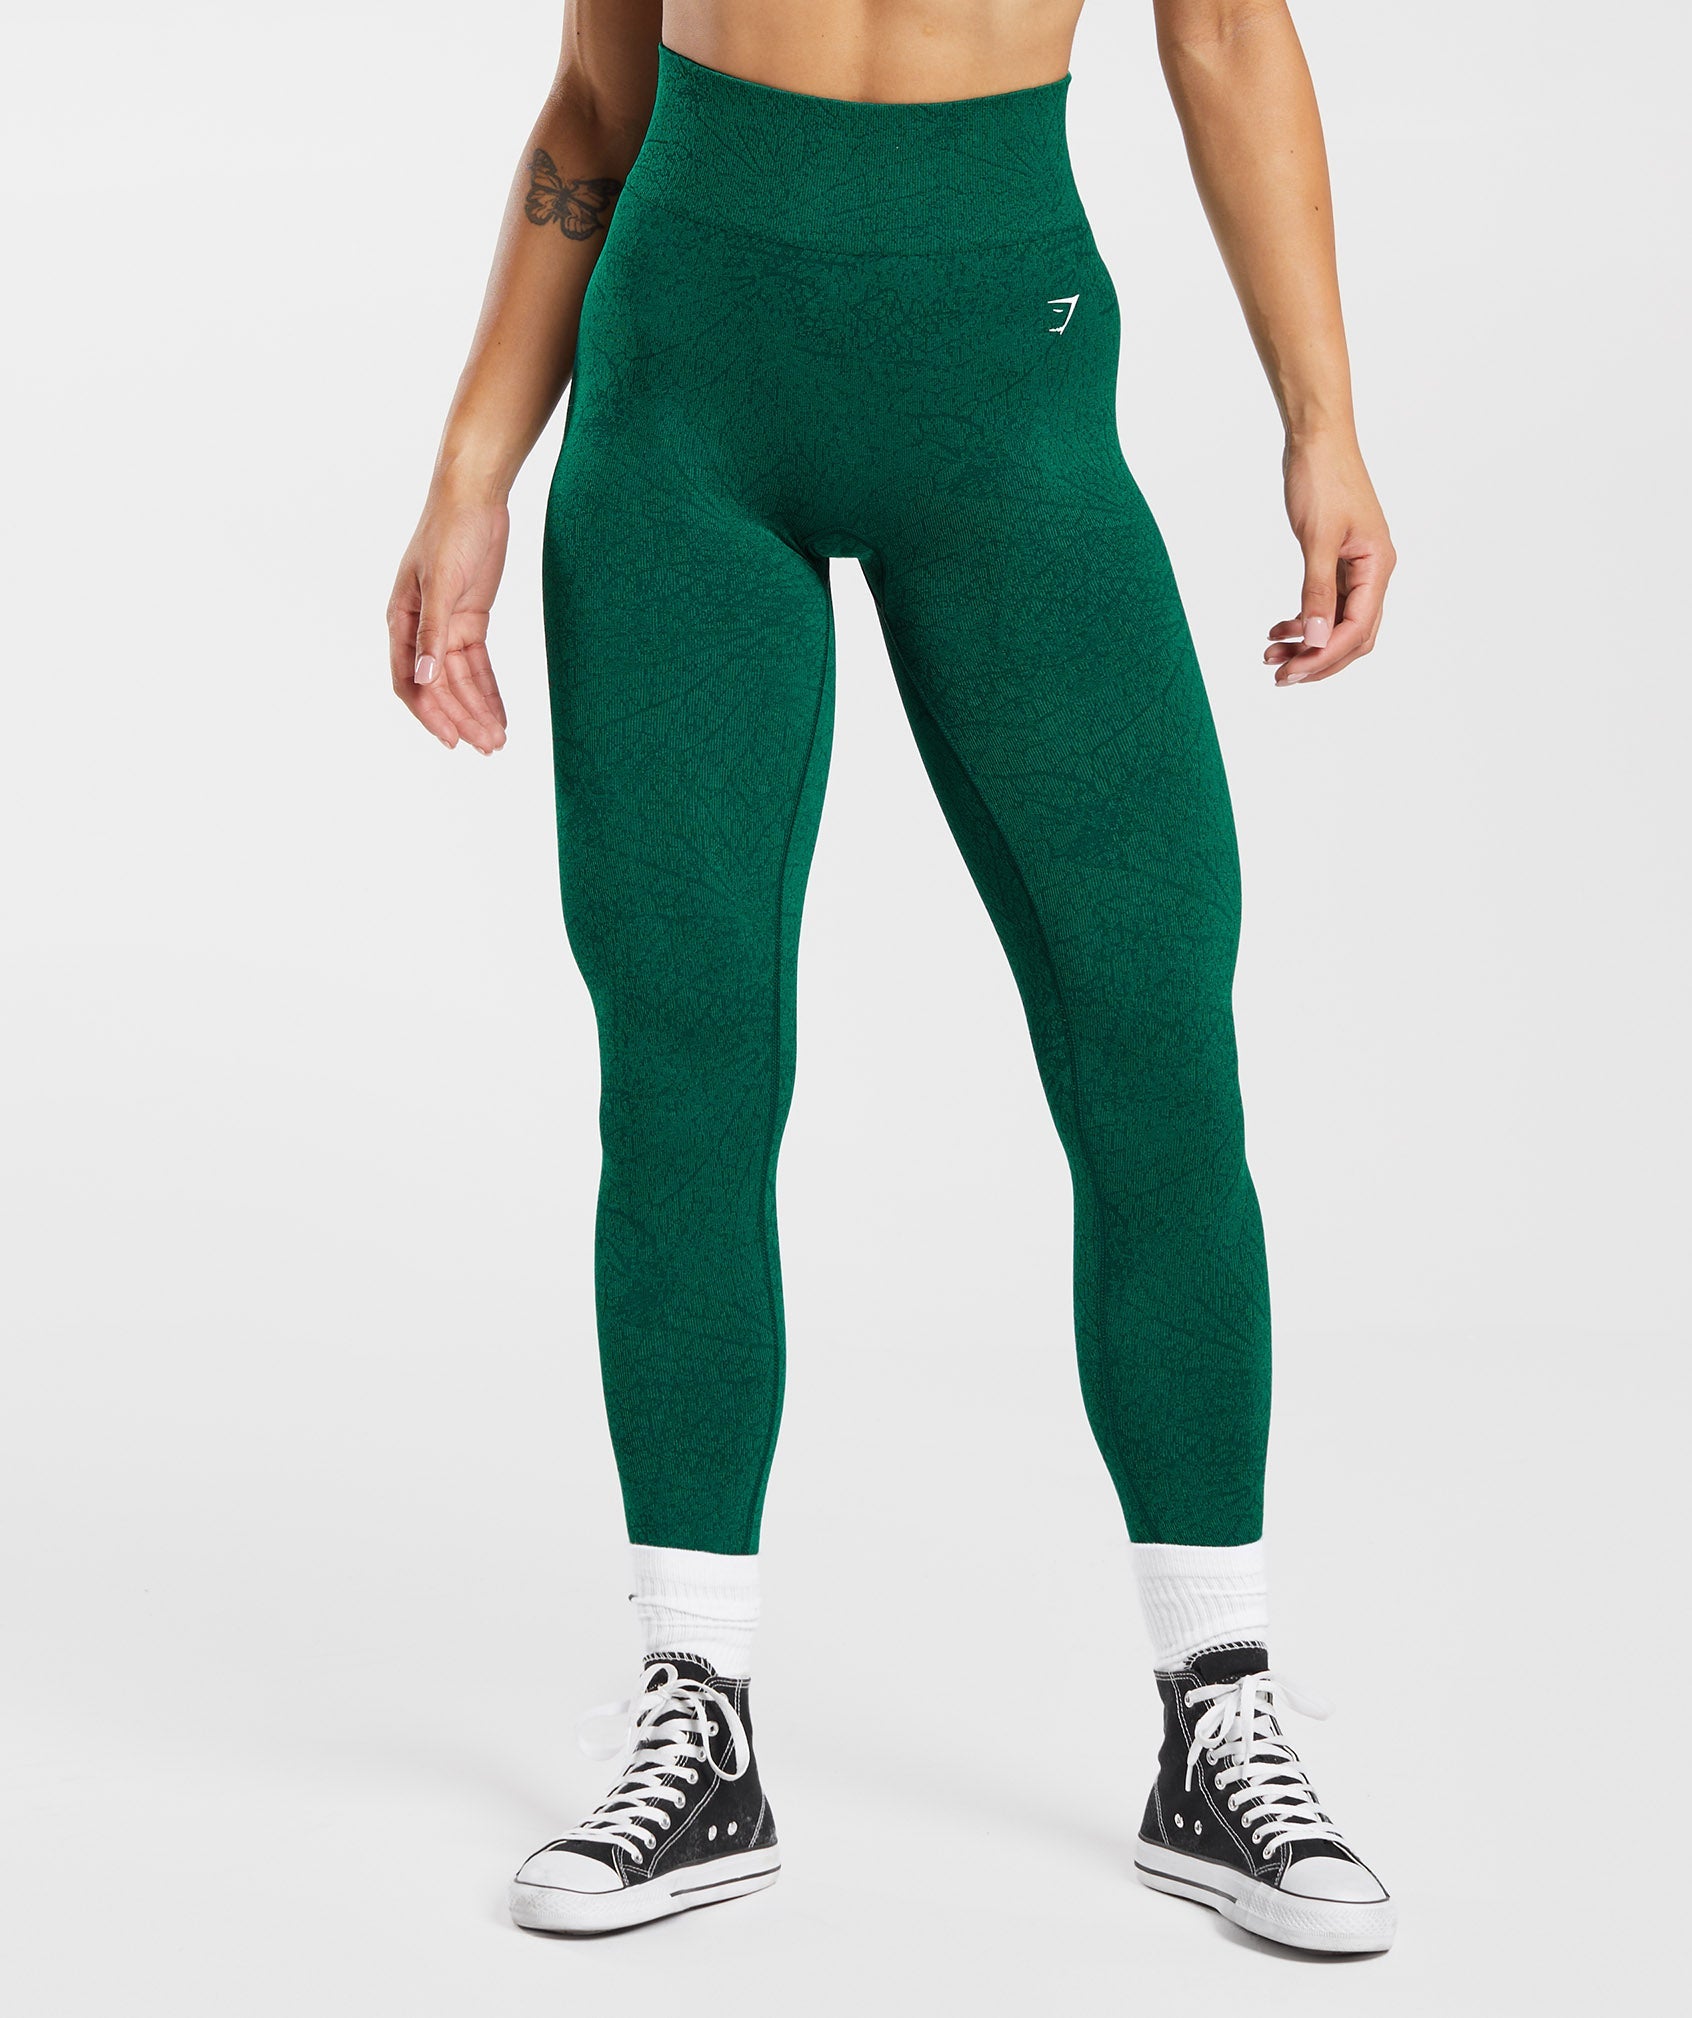 Adapt Pattern Seamless Leggings in Forest Green/Rich Green - view 1